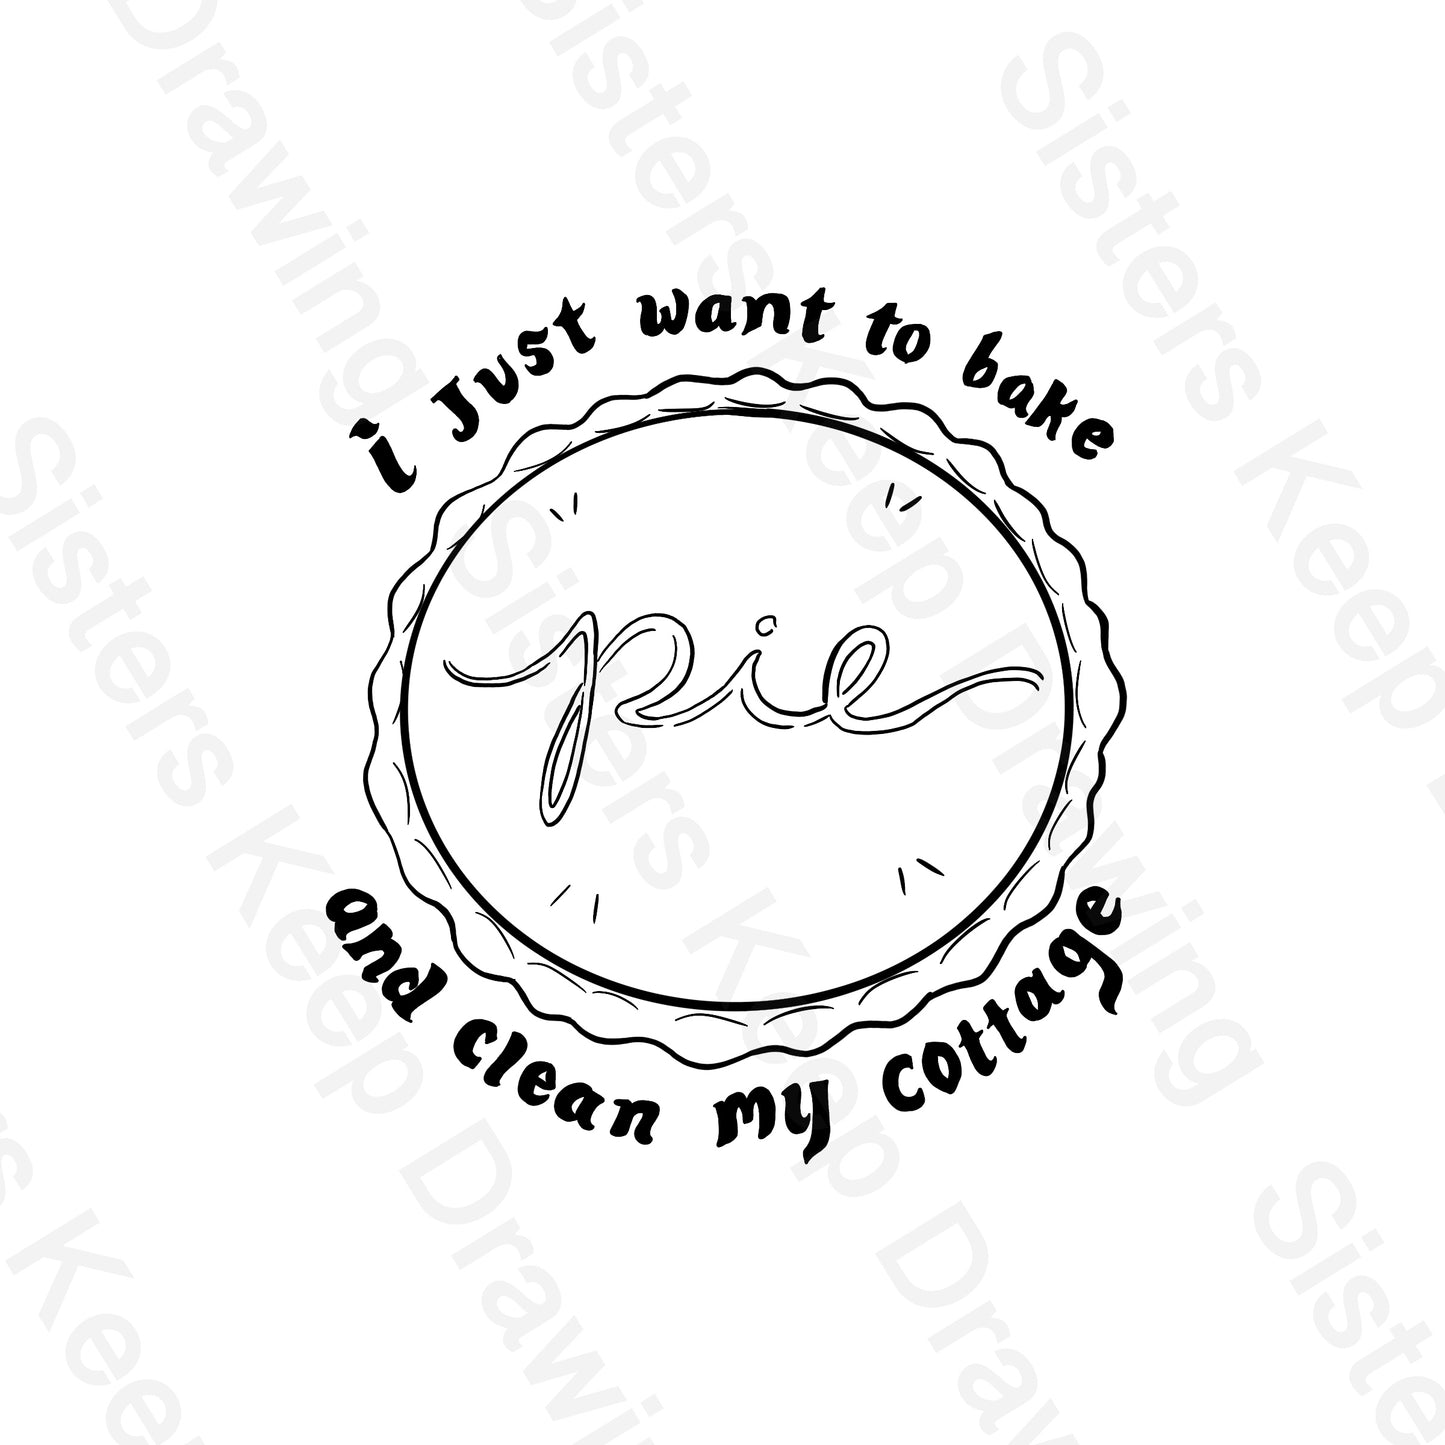 I just want to bake pie & clean my cottage - Snow White inspired- Transparent Tattoo Permission PNG